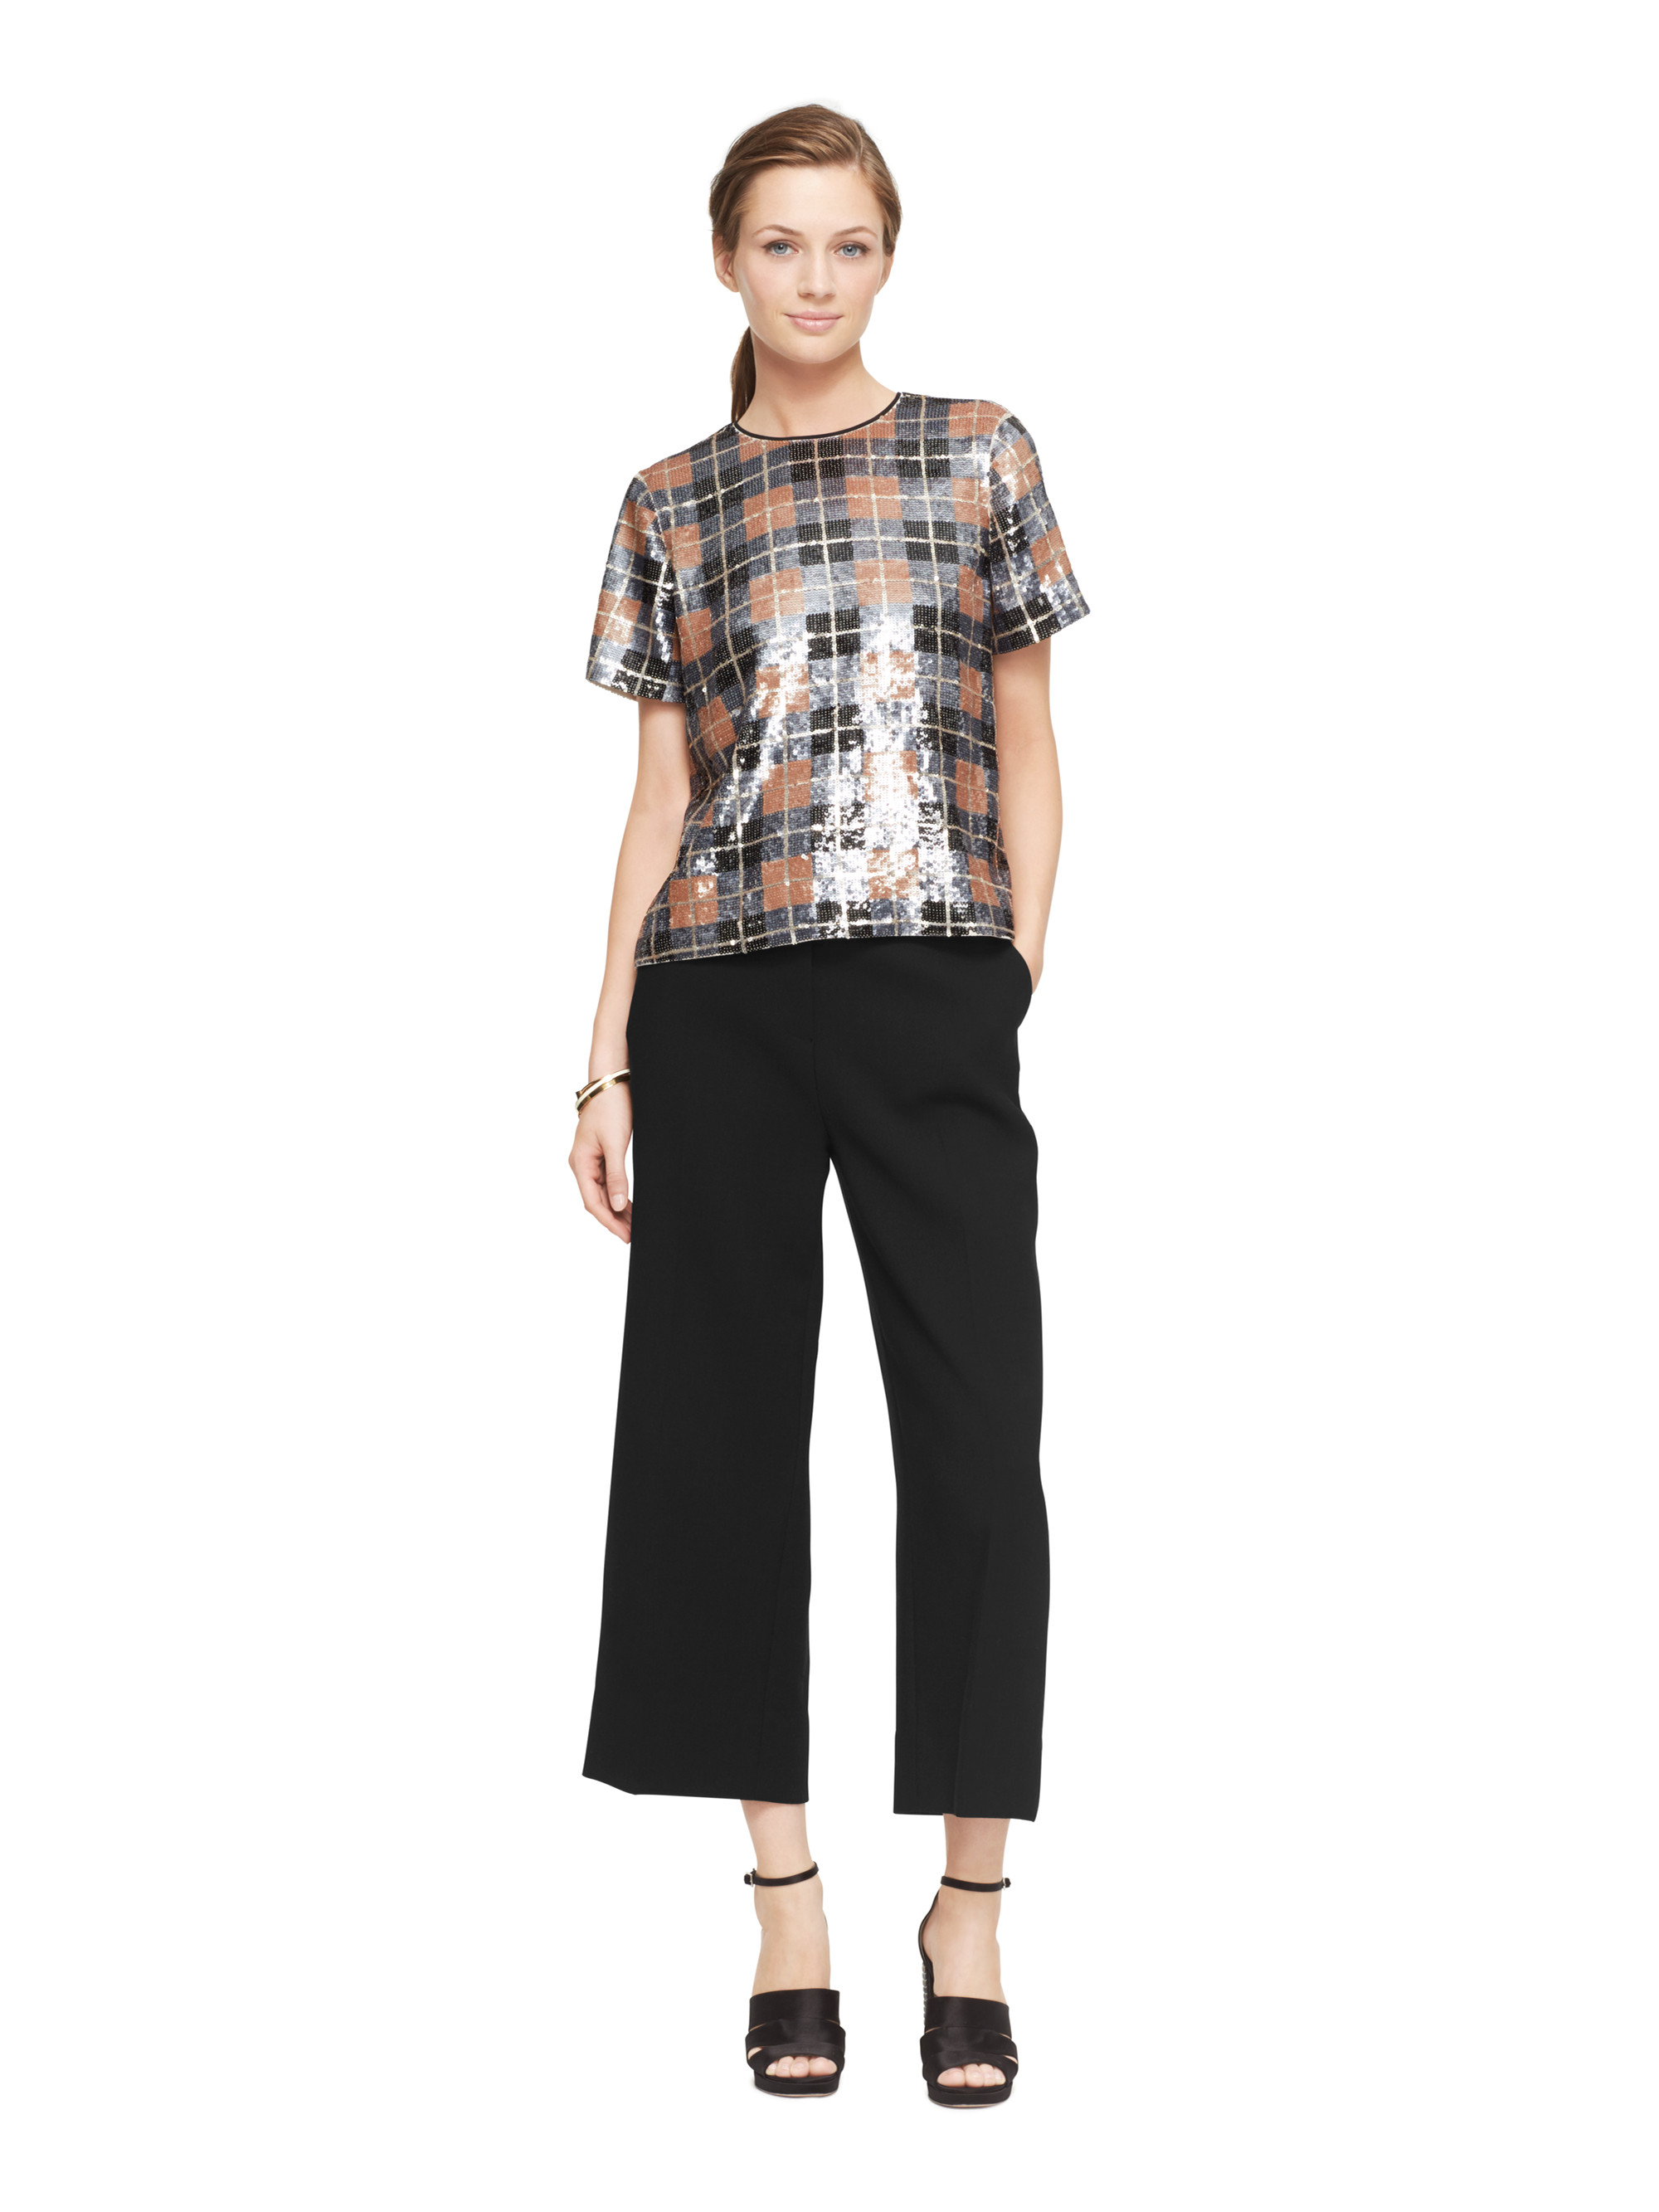 Lyst - Kate Spade New York Sequin Plaid Top2000 x 2666